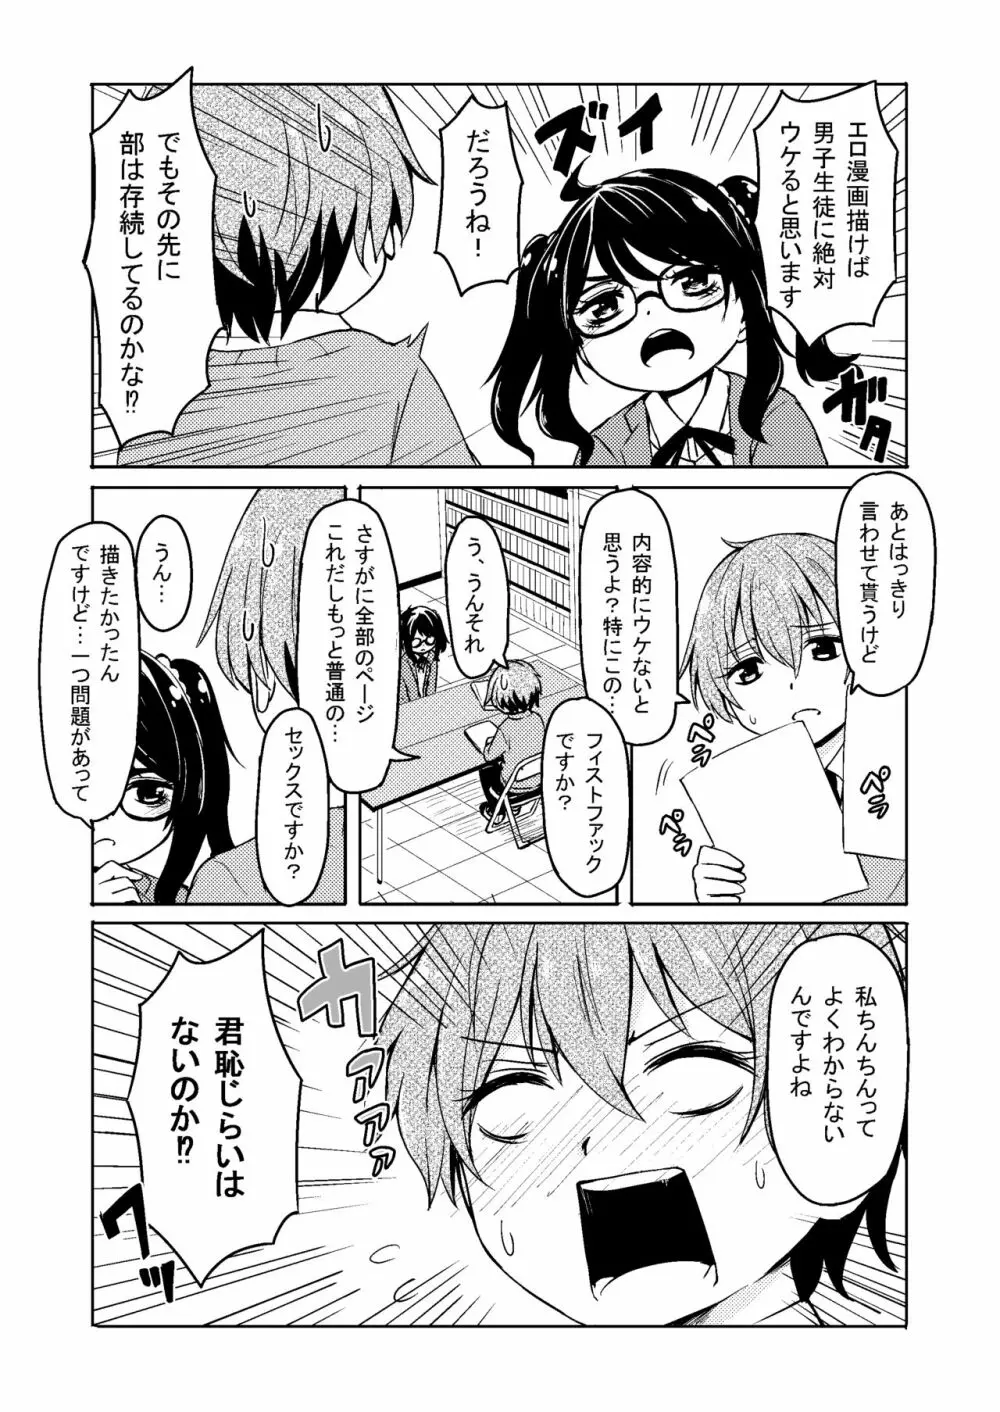 Don't scare Be born + ボツったマンガです。 - page31